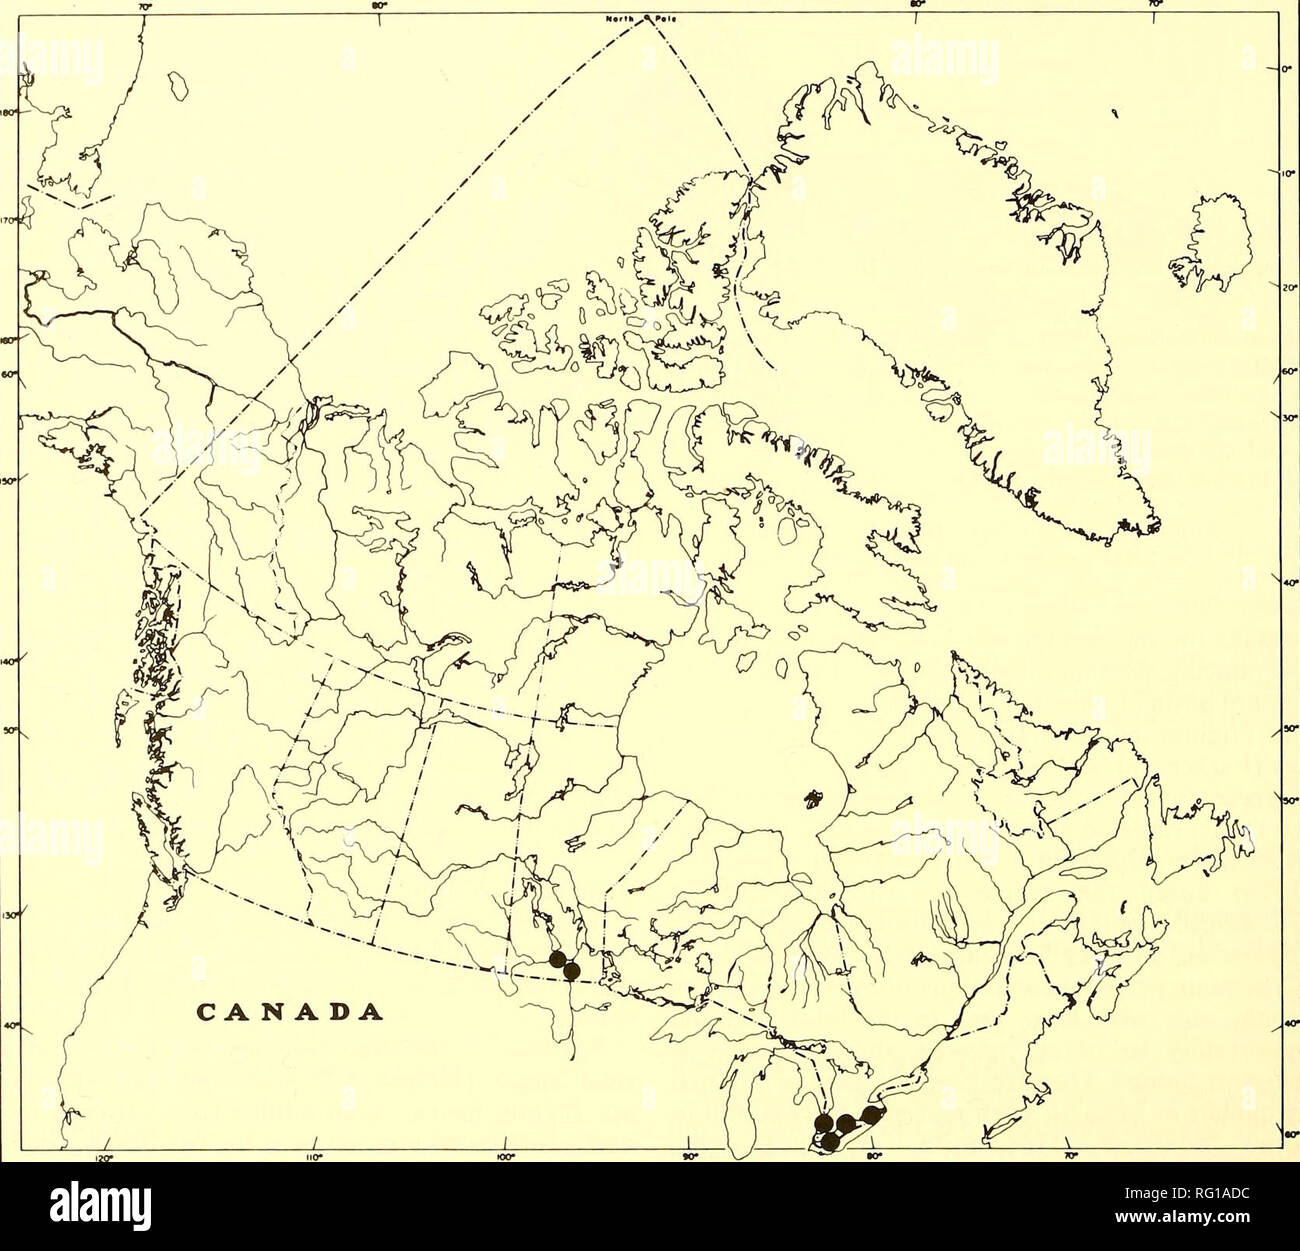 . The Canadian field-naturalist. 192 The Canadian Field-Naturalist Vol. 101. Figure 2. Canadian distribution of the Silver Chub. 1973). Kinney (1954) reported the following predators of the Silver Chub: Burbot, Lota lota, Sauger, Stizostedion canadense, and Walleye, Stizostedion vitreum. Limiting Factors Temporary hypoxic water conditions have been reported from the western Lake Erie basin on several occasions (Carr et al. 1955; Leach and Nepszy 1975), and Kinney (1954) believed that such conditions could affect Silver Chub population stability. The disappearance of a major diet component (Hex Stock Photo